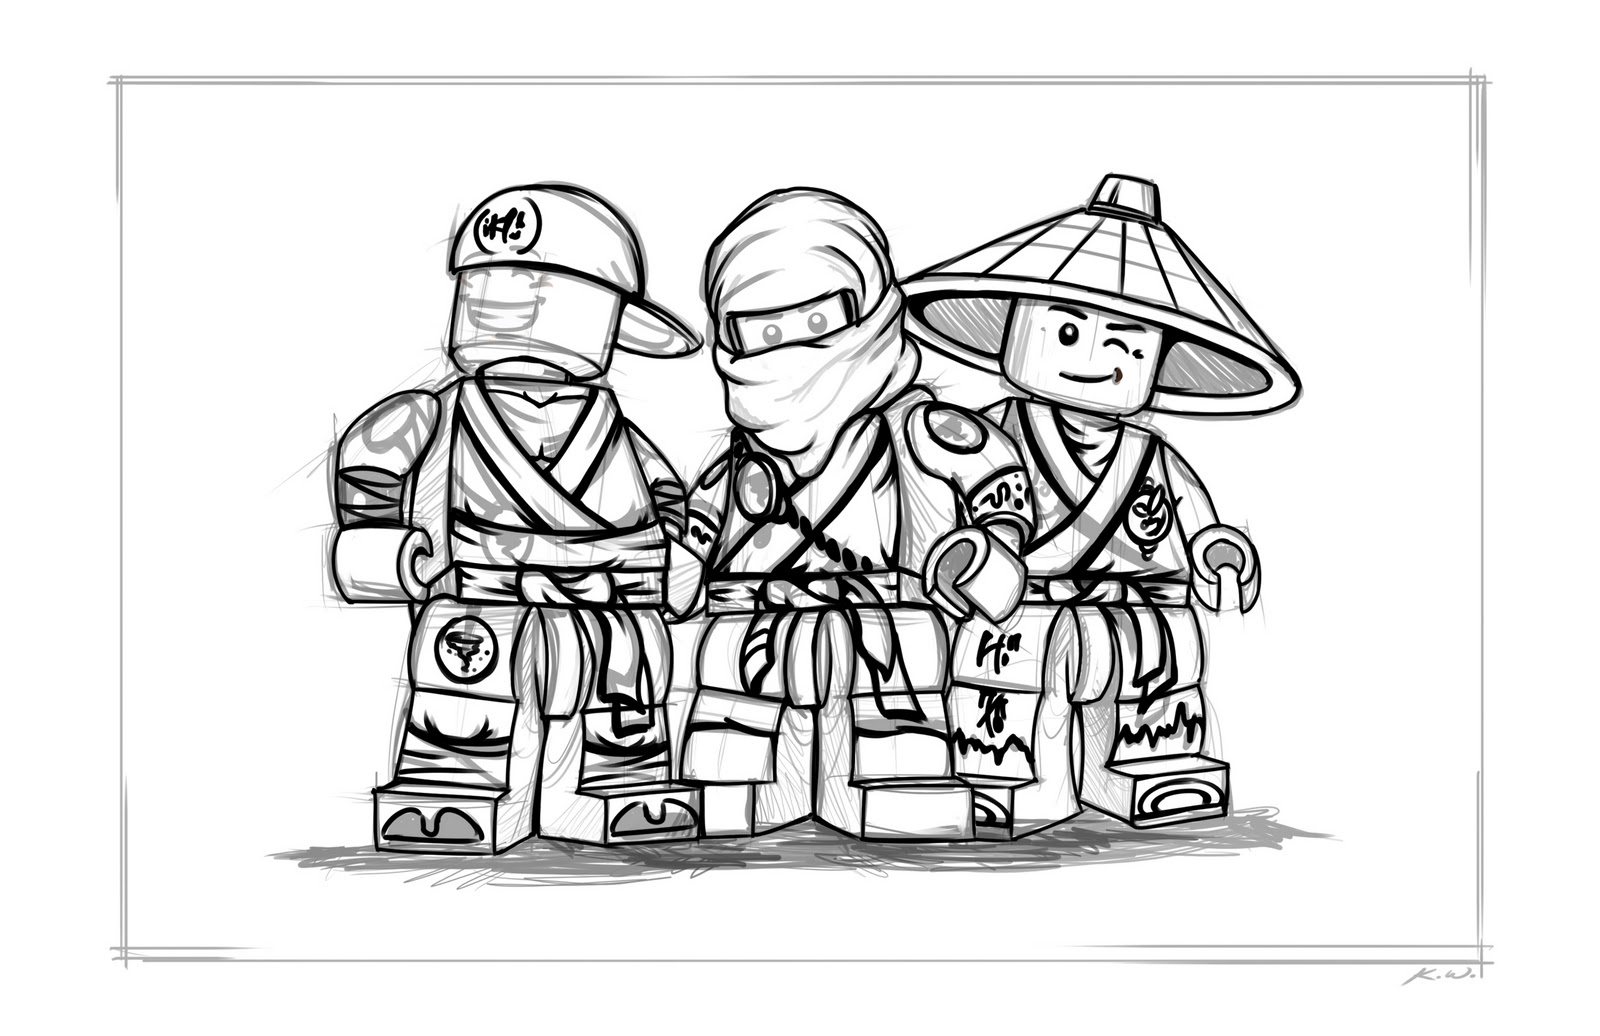 Lego Ninjago Coloring Pages Coloring Pages For Kids